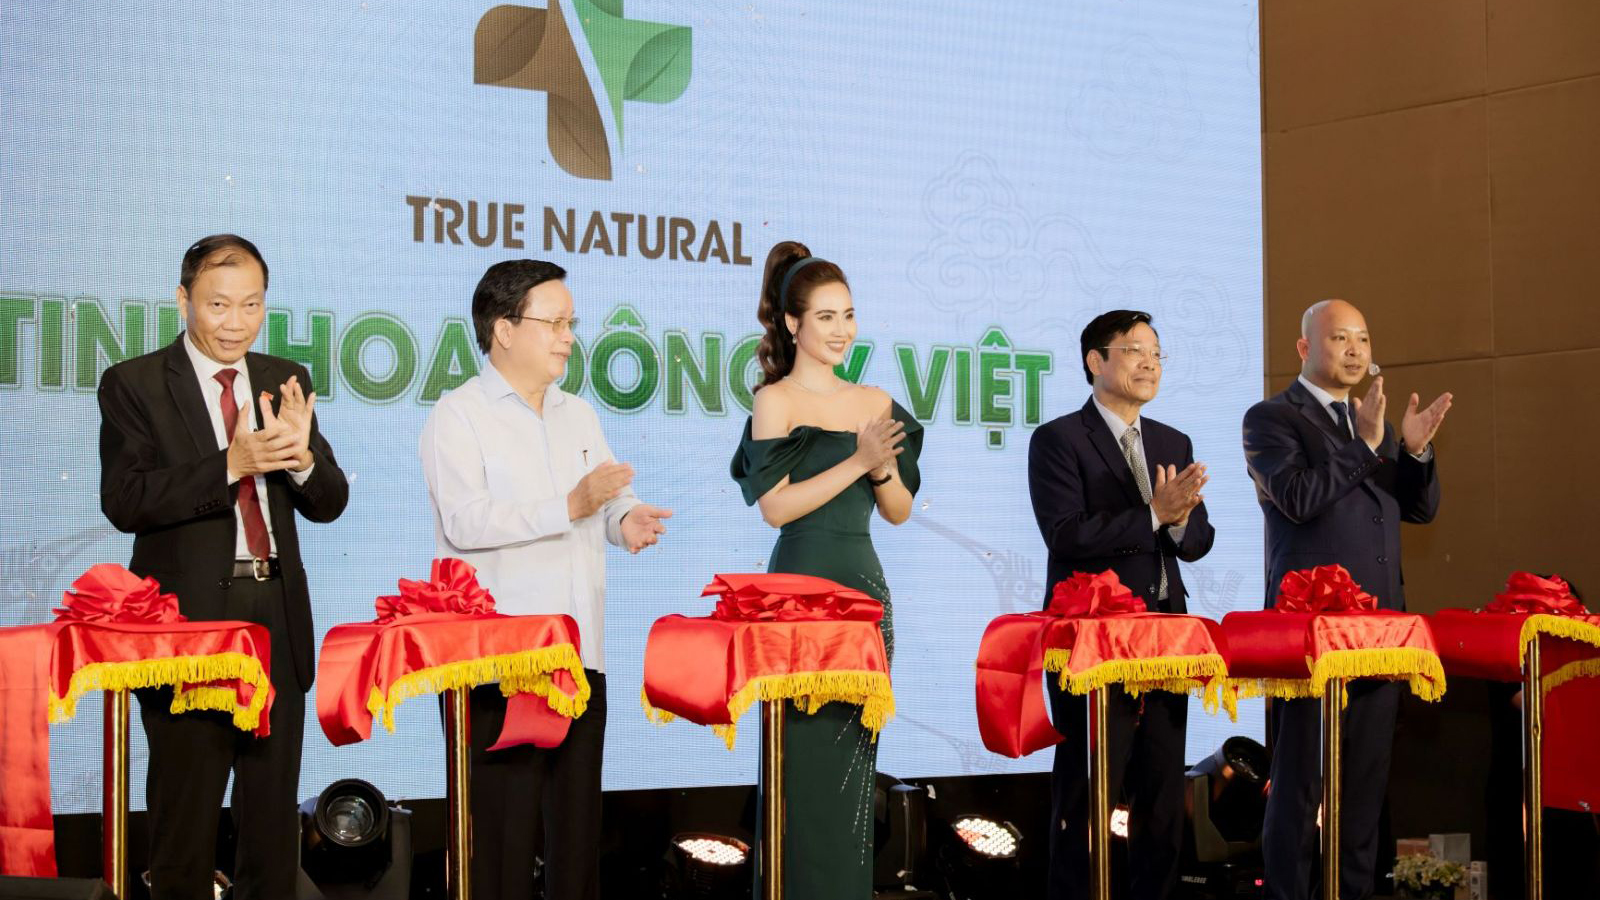 True Natural brand launch event